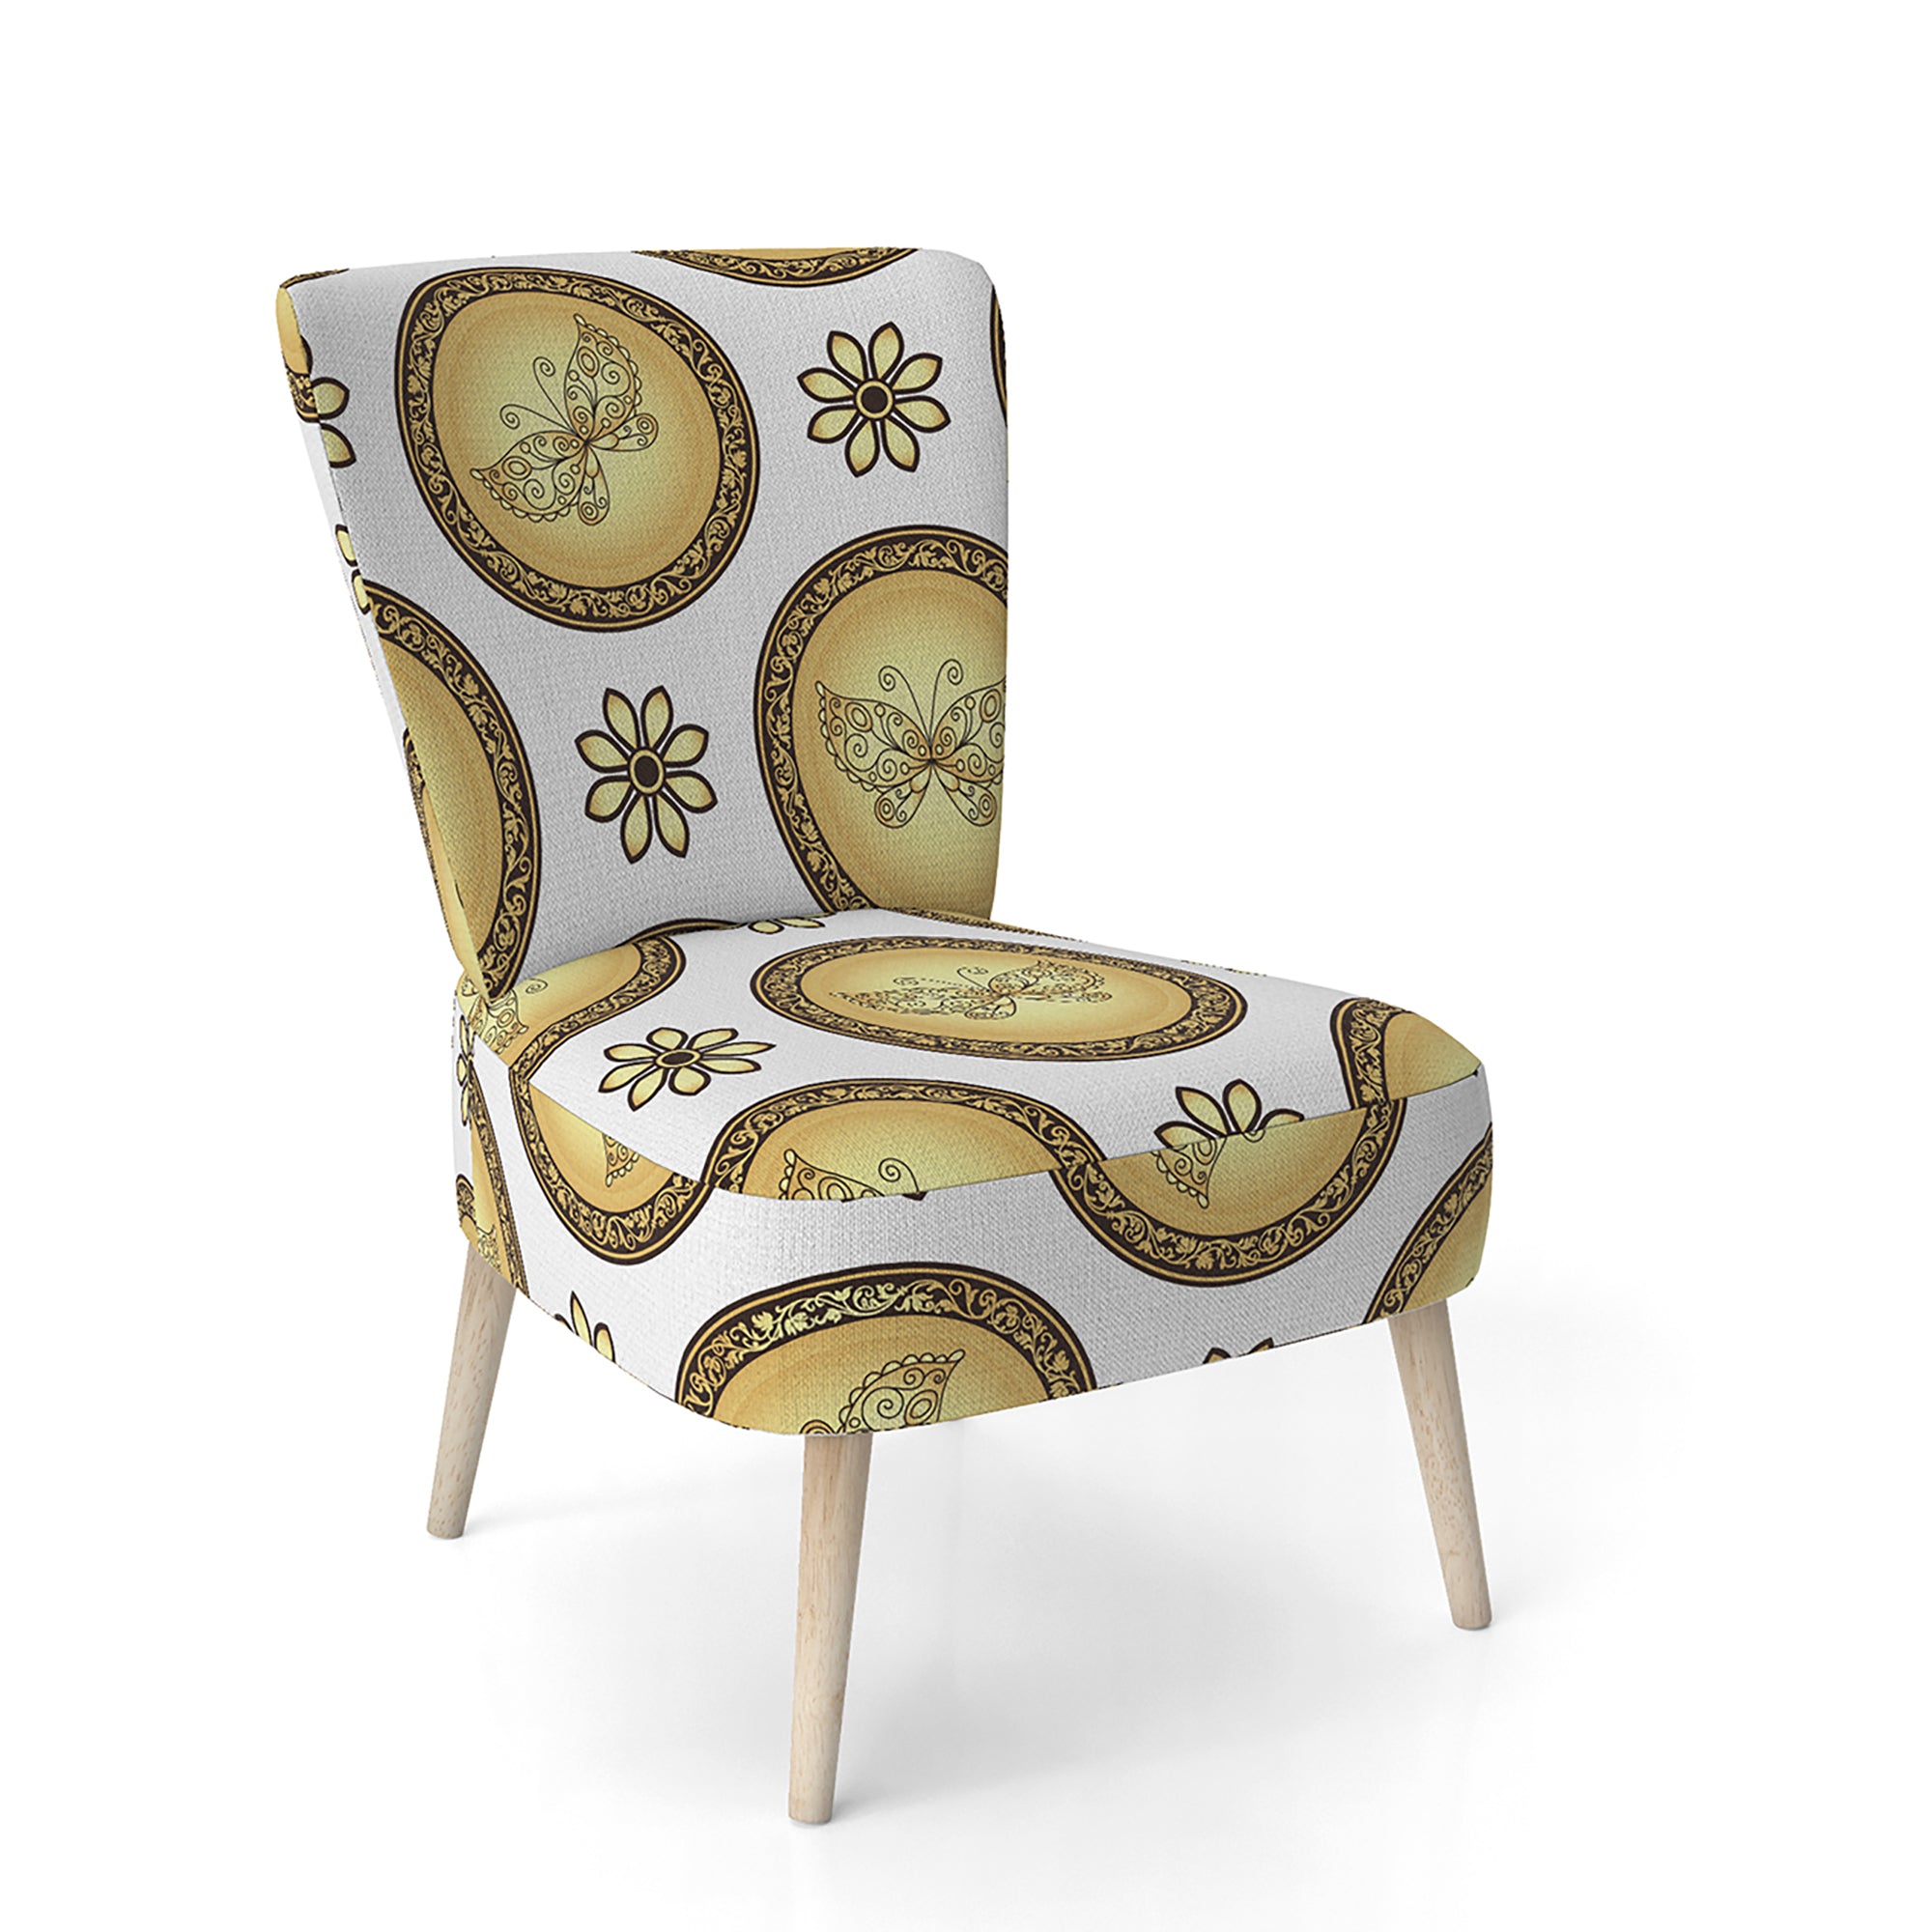 Gold and browne pattern with gradient vintage circles Mid-Century Accent Chair